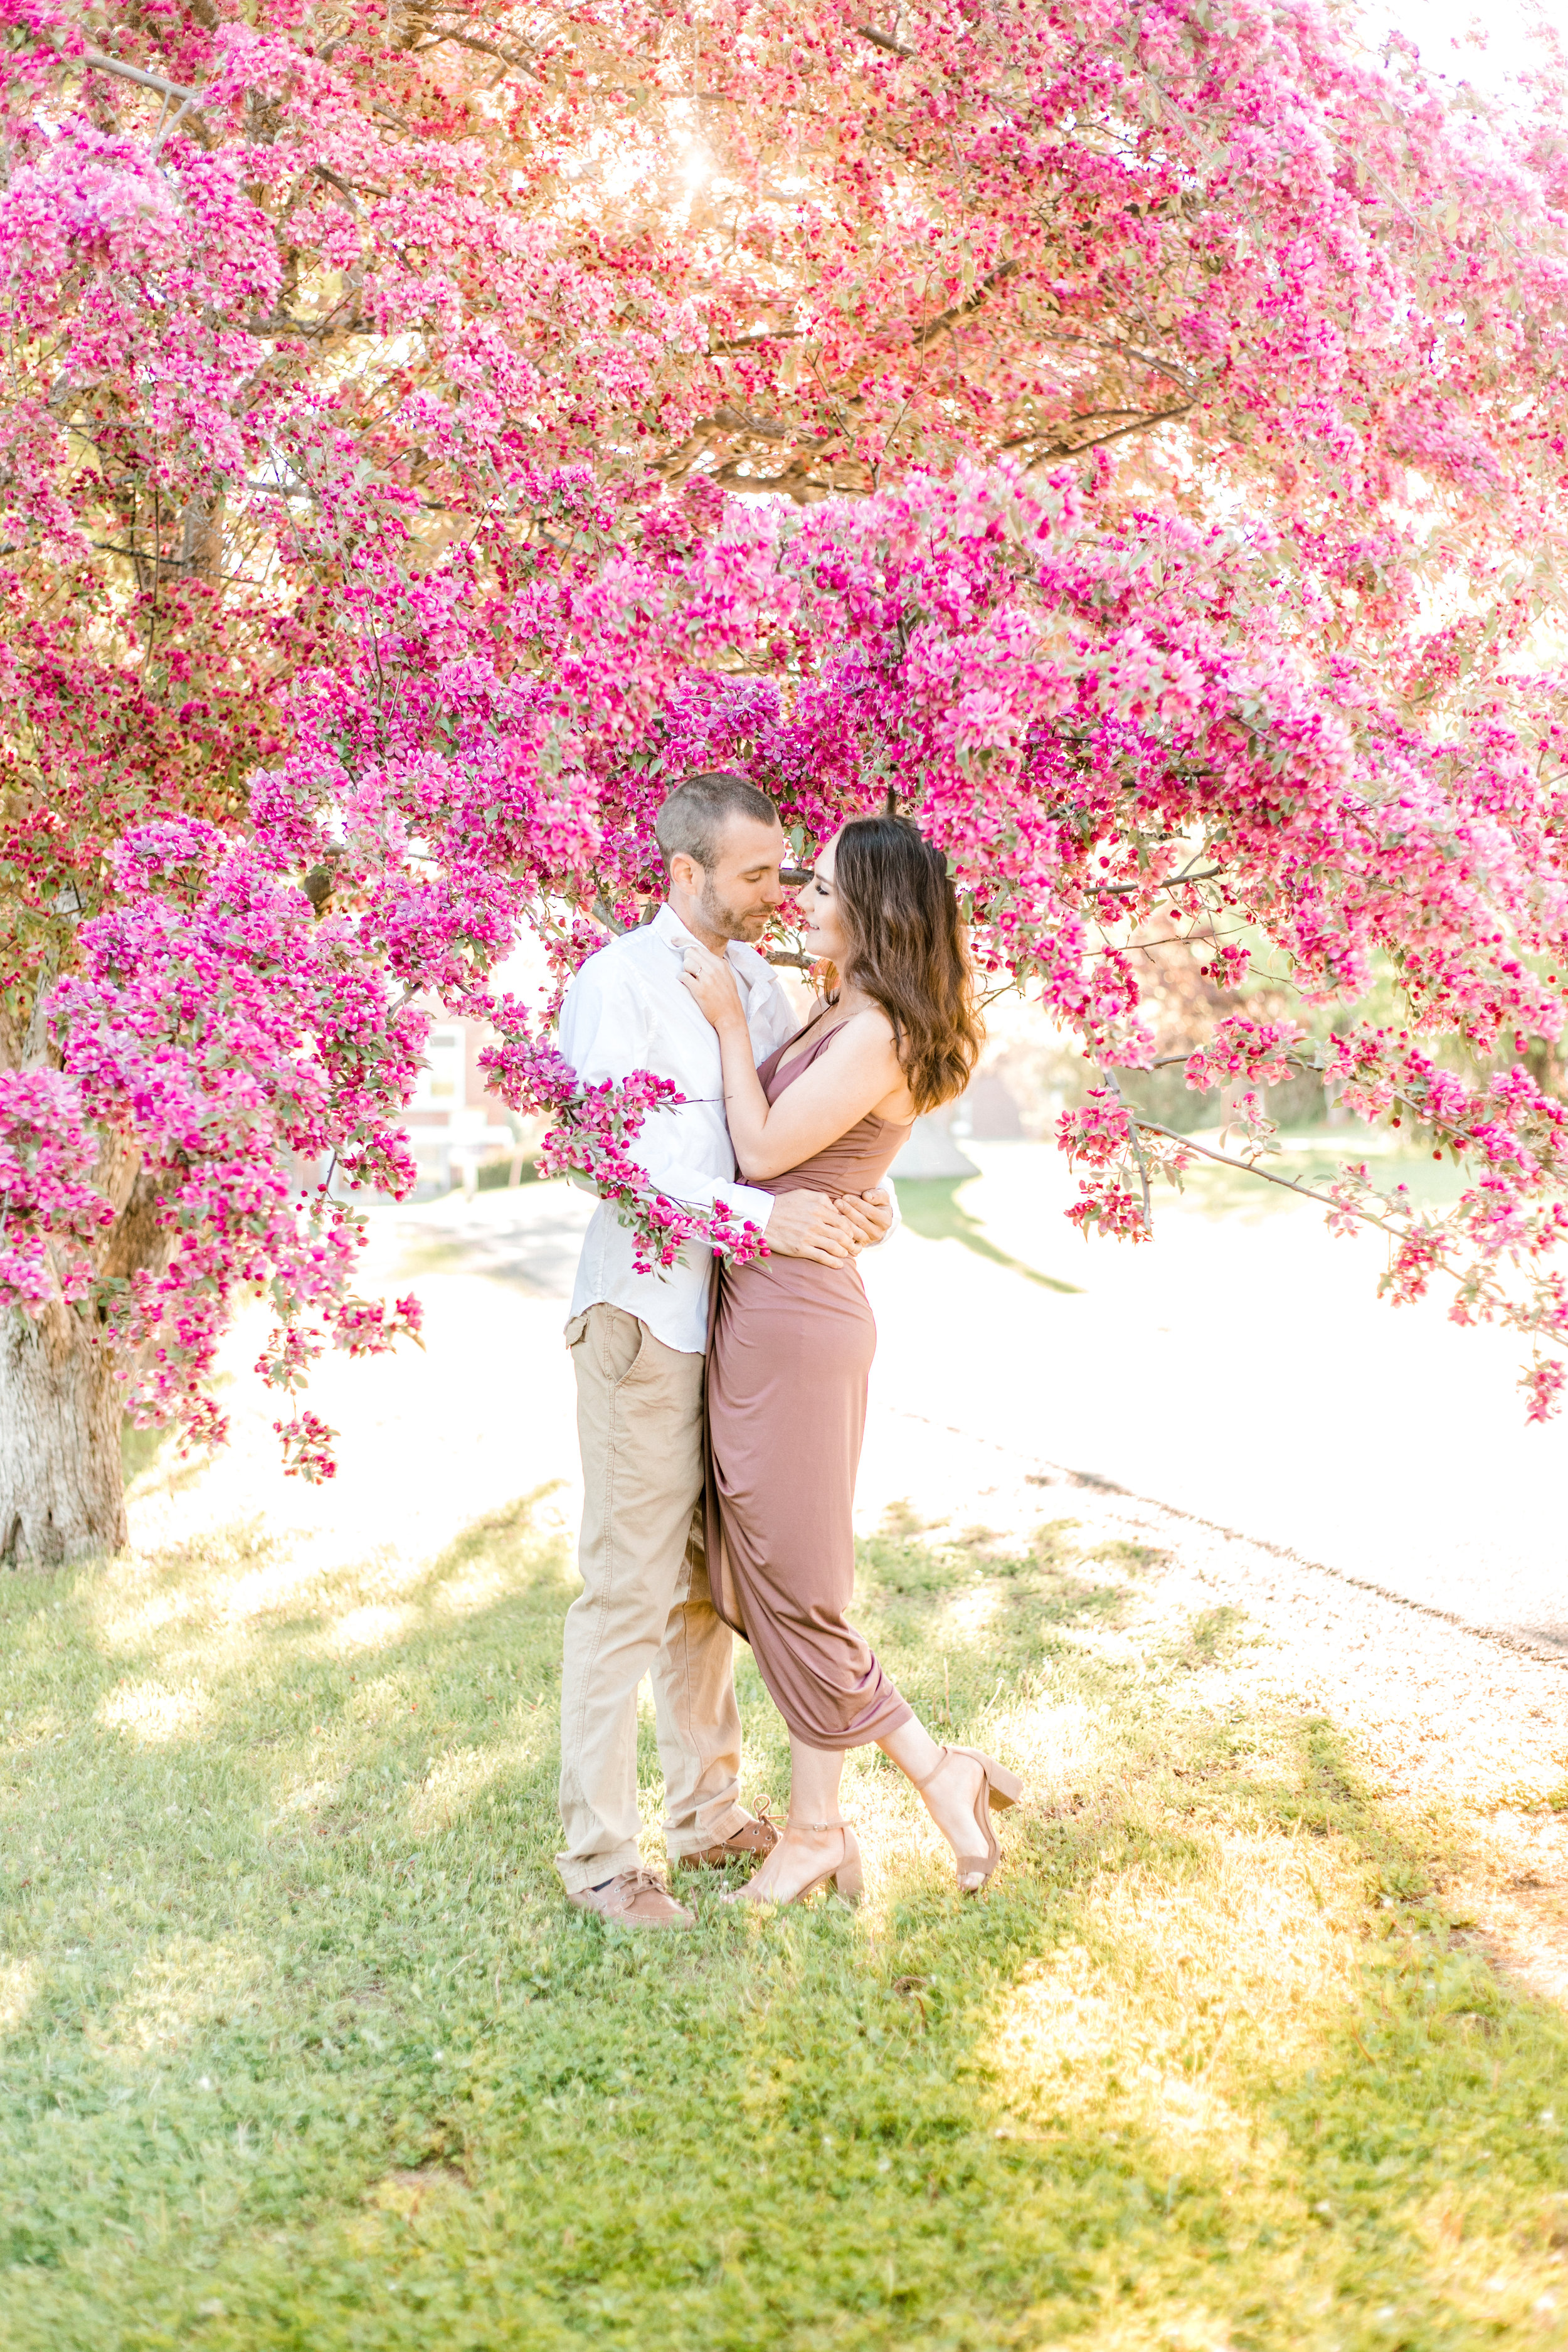 Engagement pictures should be romantic and fun! This golden glow session was jus that. Sunrise orchard engagement photo ideas with flower blossoms for engagement photos in an apple orchard.